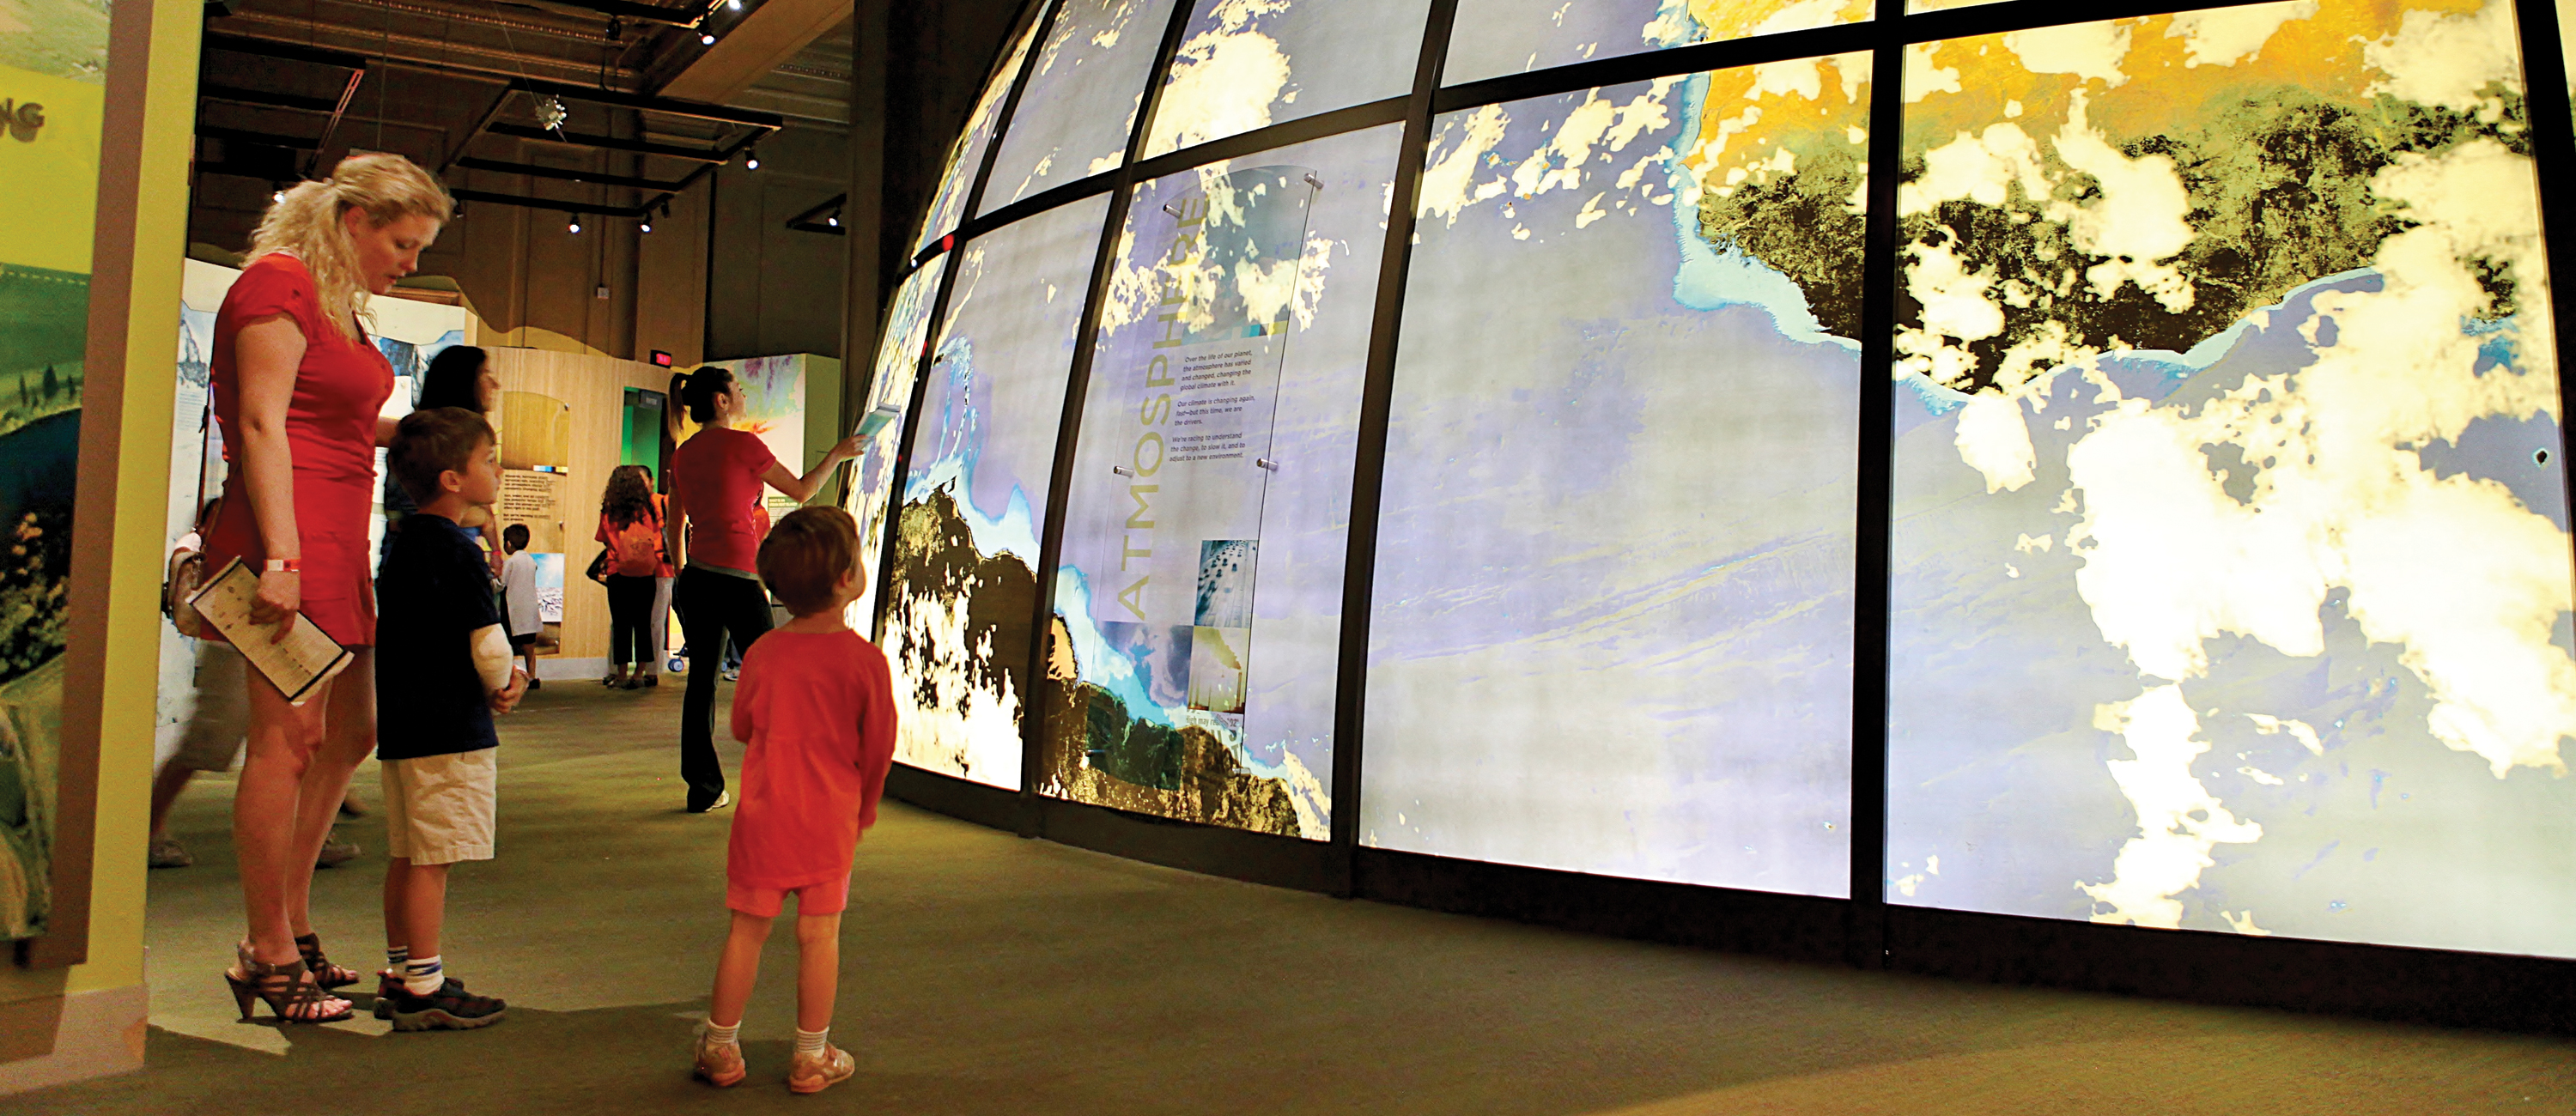 Visitors enjoying the permanent exhibit, Changing Earth. The giant globe in the center of the exhibit can be seen prominently.